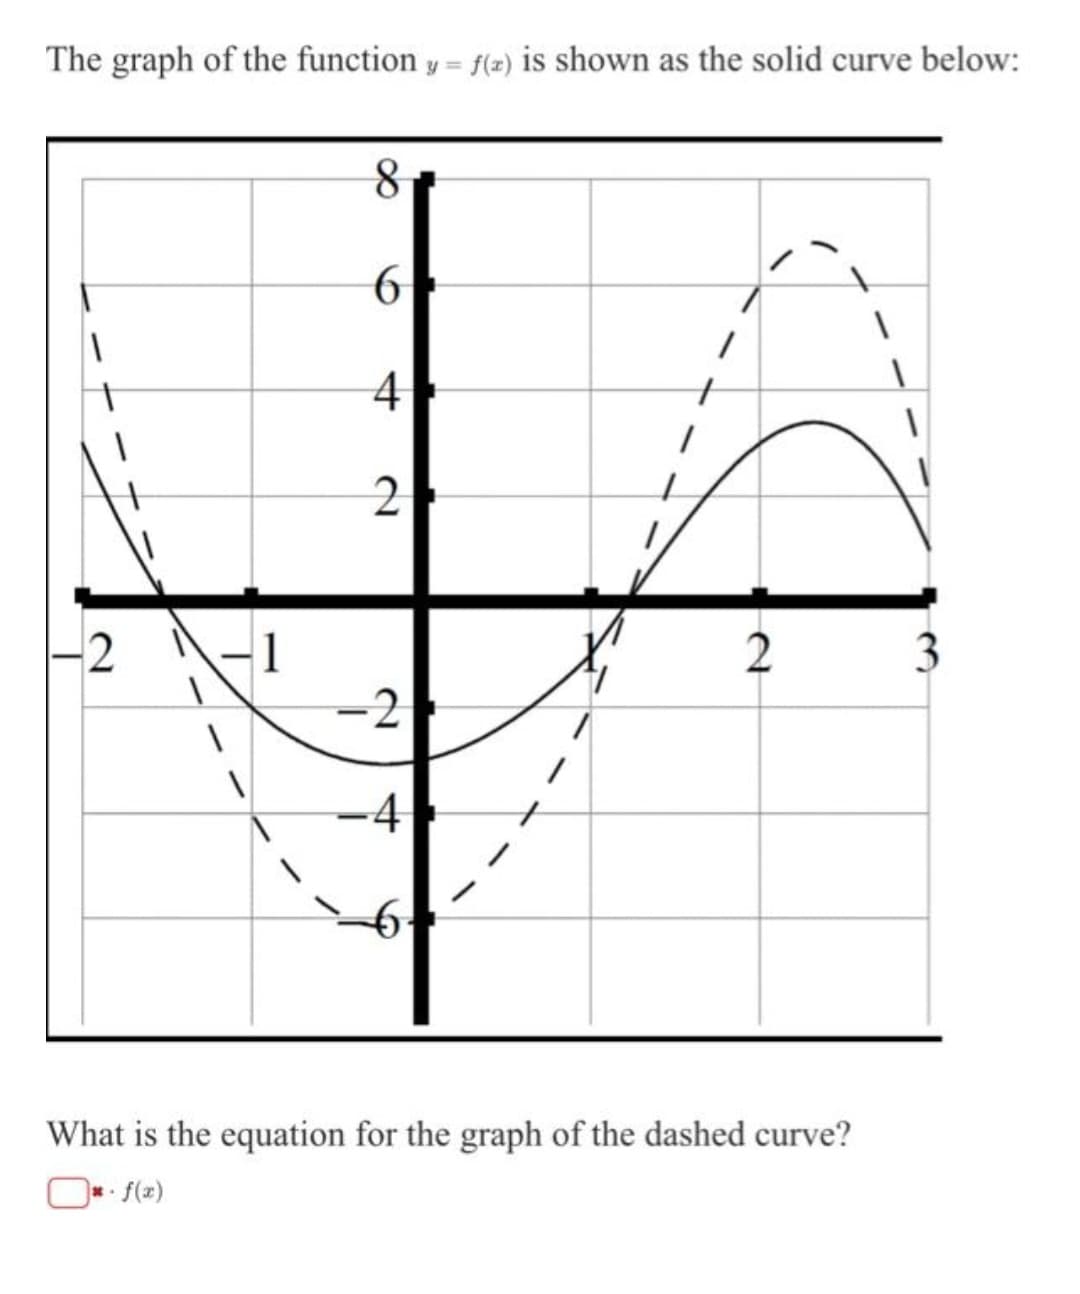 The graph of the function y = f(z) is shown as the solid curve below:
2
8
6
4
2
-2
-4
1
2
What is the equation for the graph of the dashed curve?
*. f(x)
3